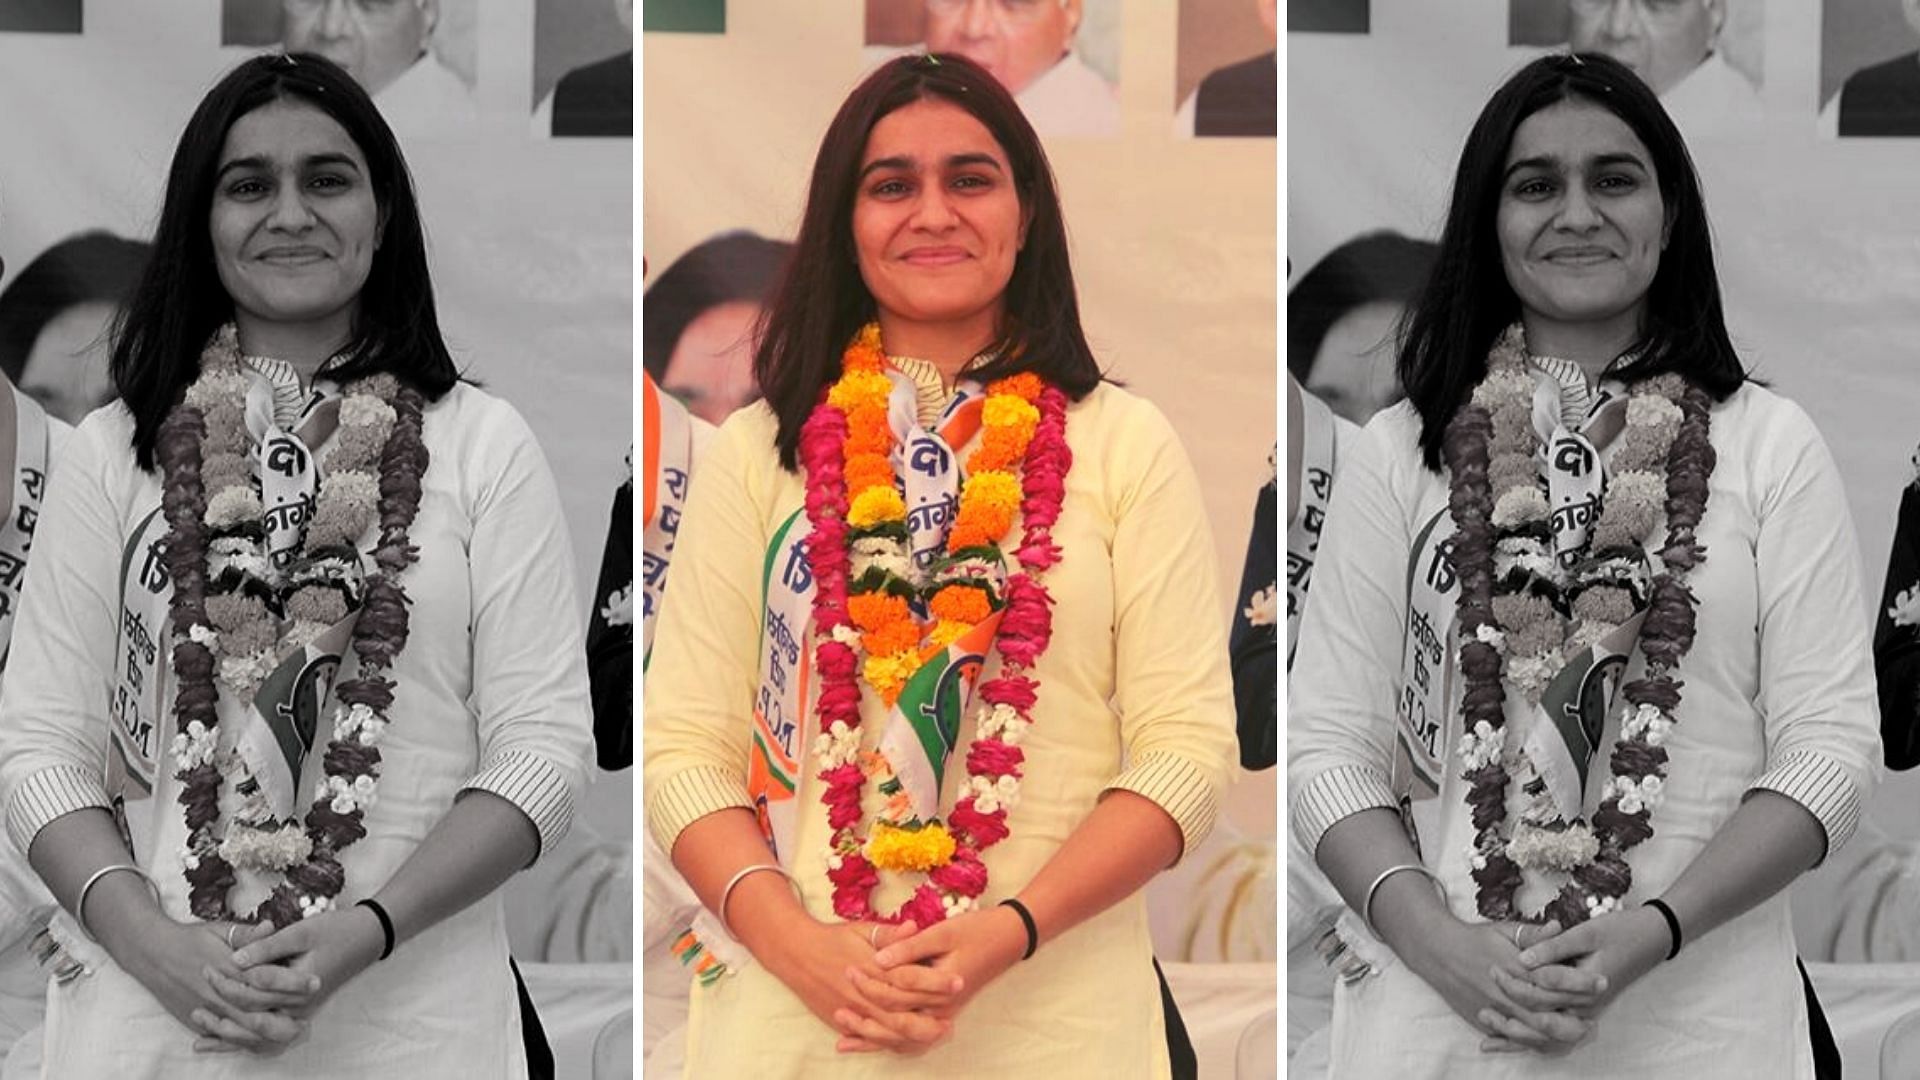  Sonia Doohan, NCP’s student wing president.